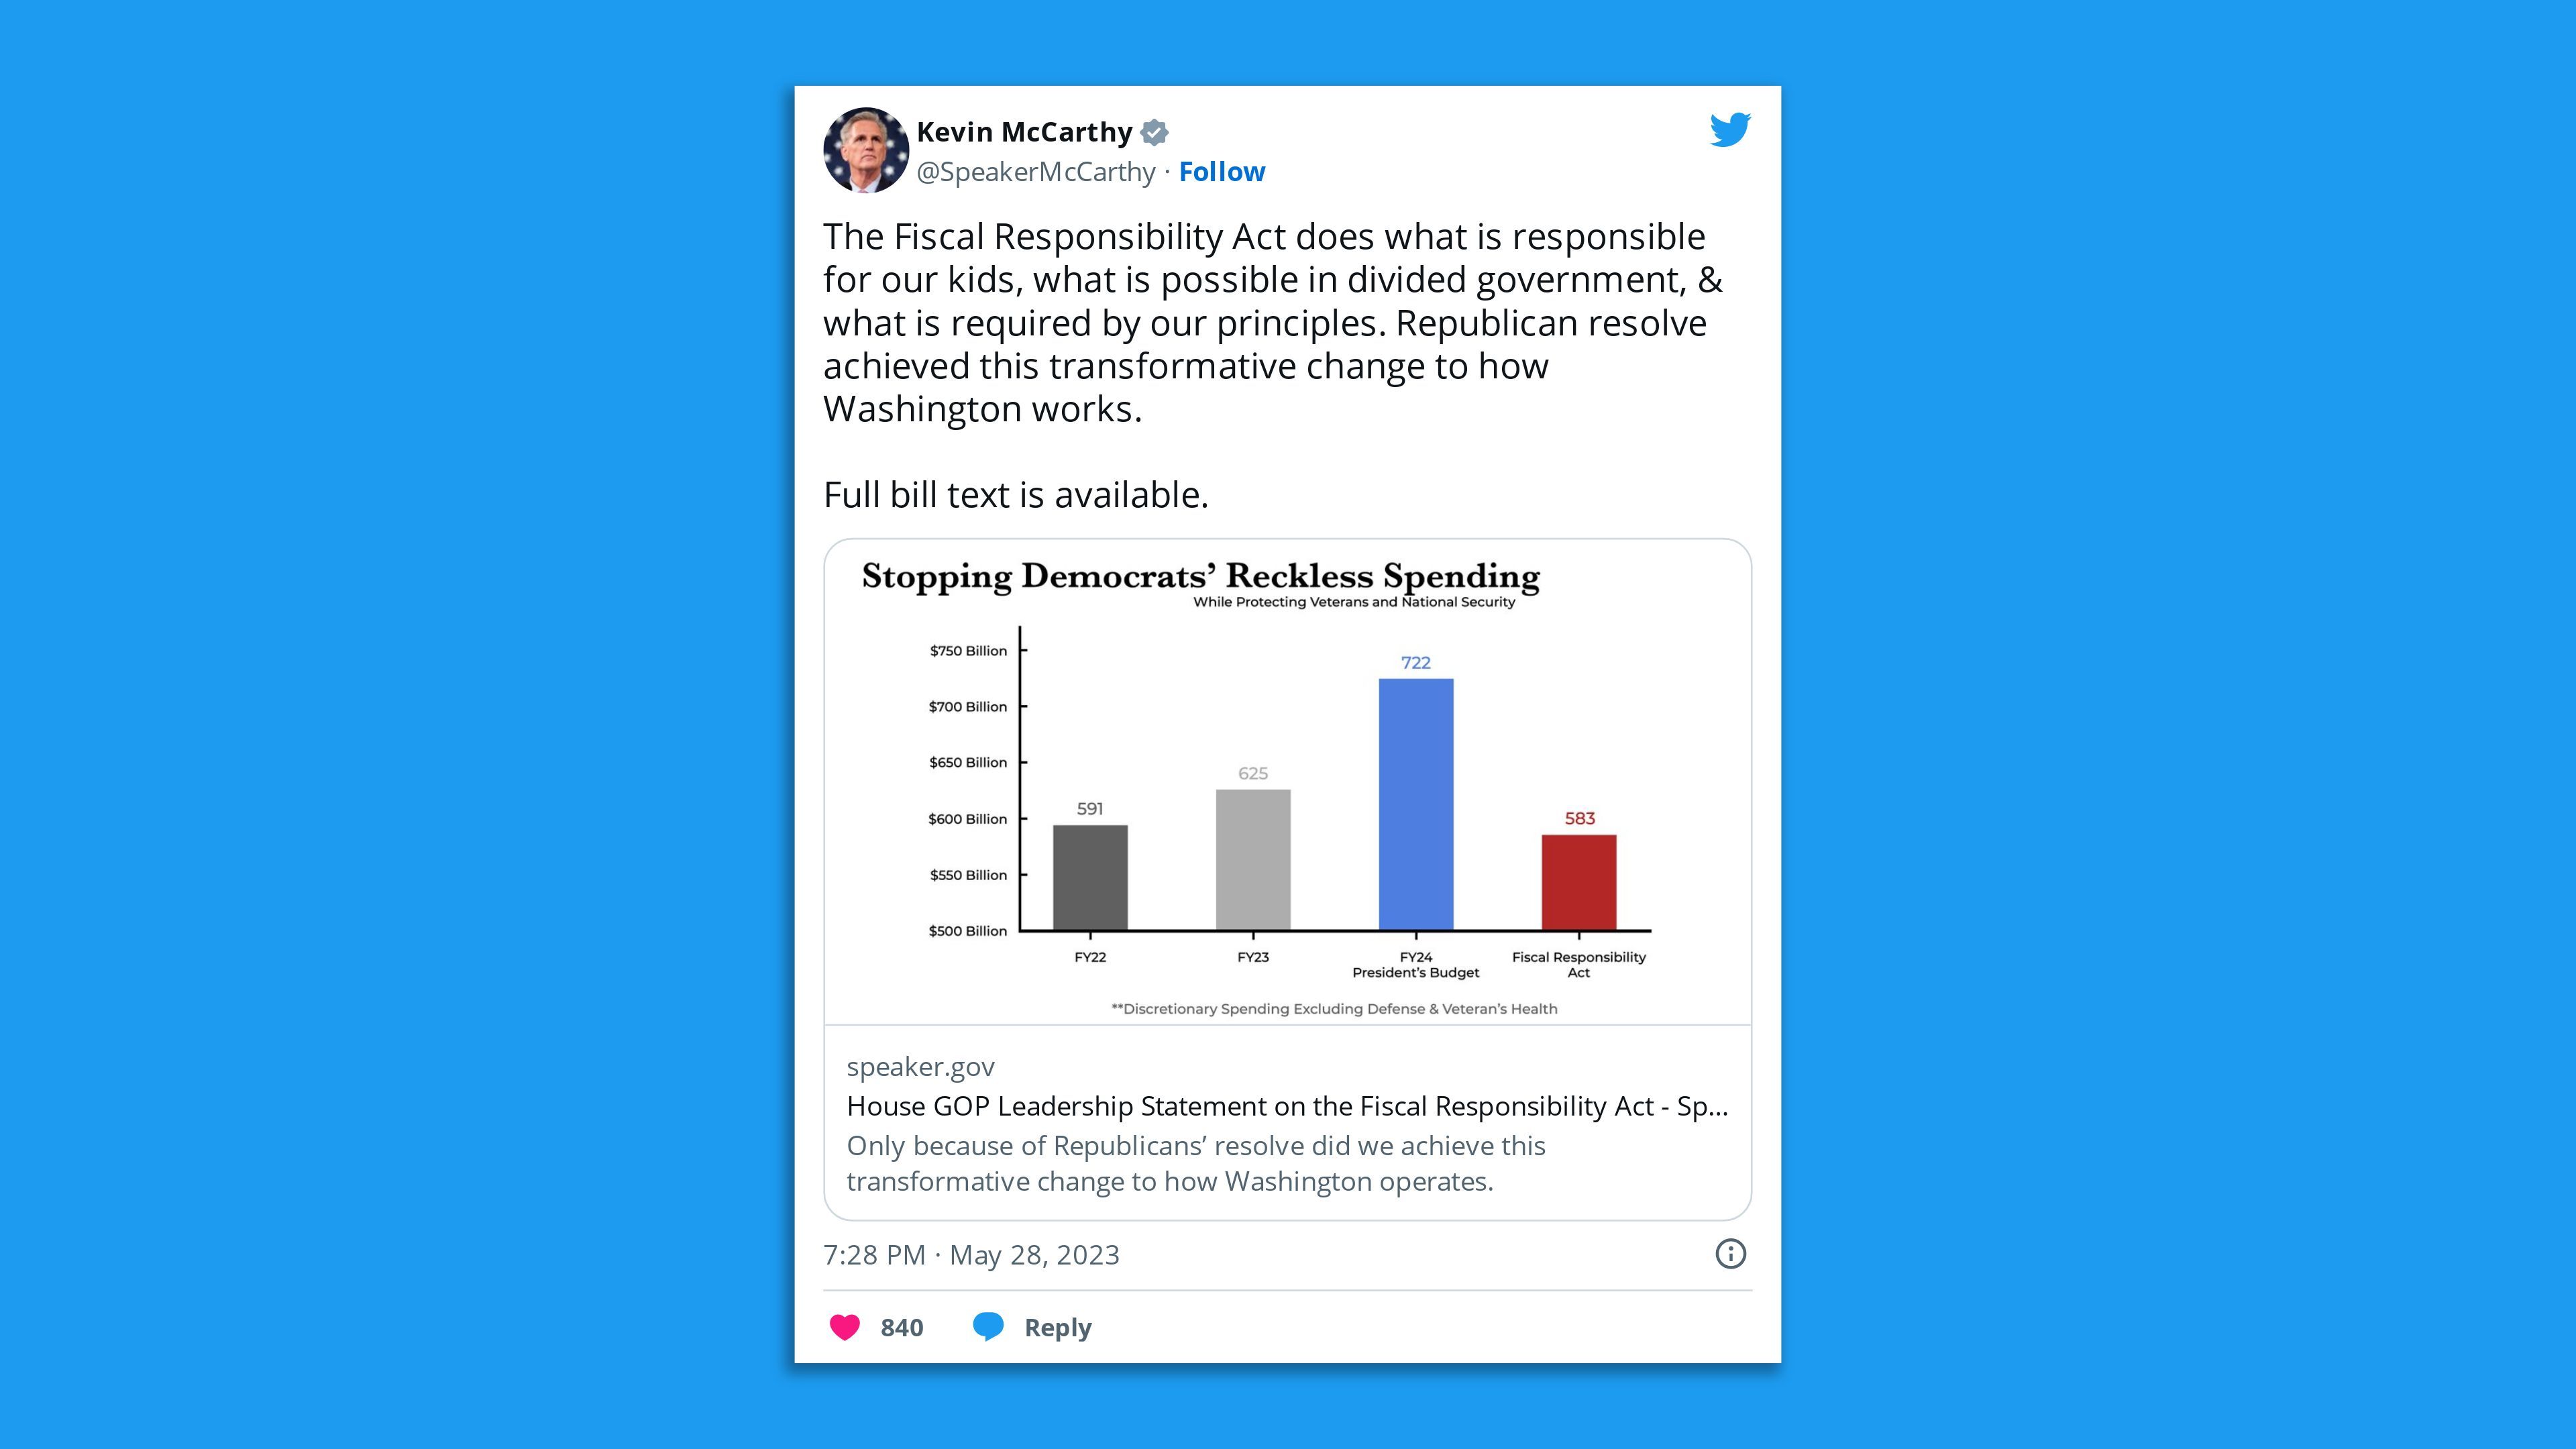 A screenshot of a tweet by House Speaker Kevin McCarthy, saying: "The Fiscal Responsibility Act does what is responsible for our kids, what is possible in divided government, & what is required by our principles. Republican resolve achieved this transformative change to how Washington works."